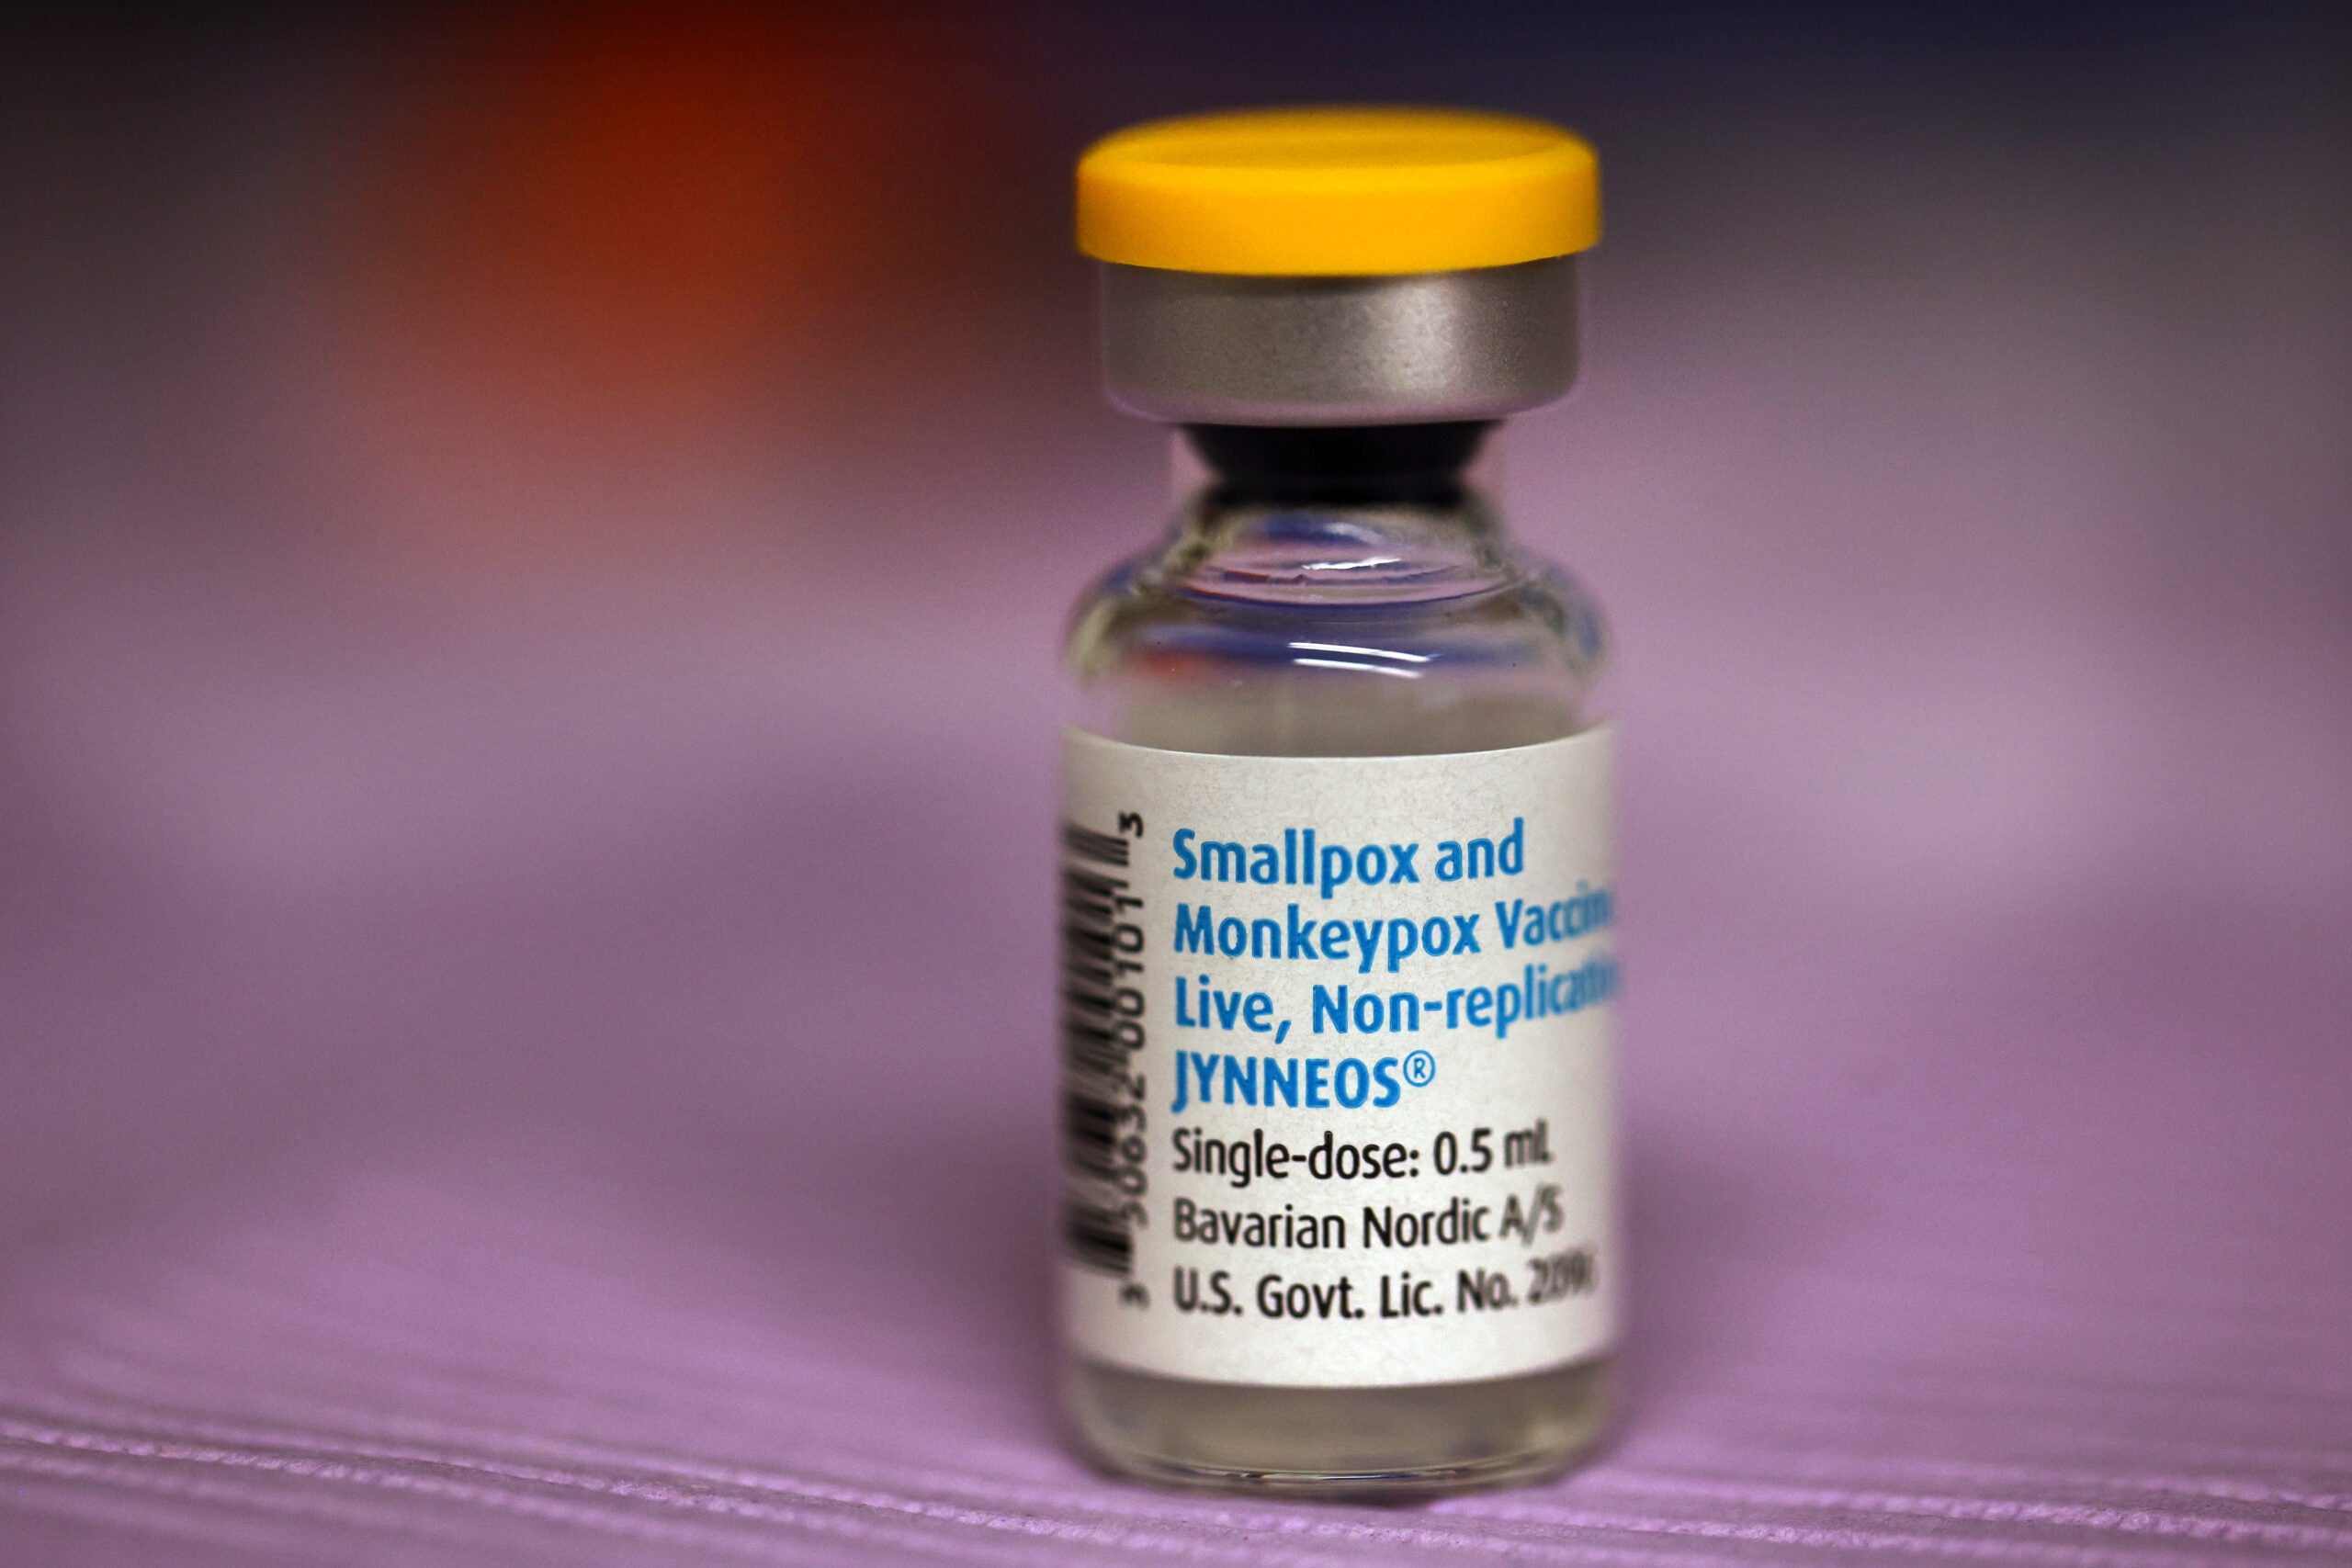 The JYNNEOS smallpox and monkeypox vaccine displayed at the JRI Health monkeypox clinic in Framingham, MA on August 11, 2022.